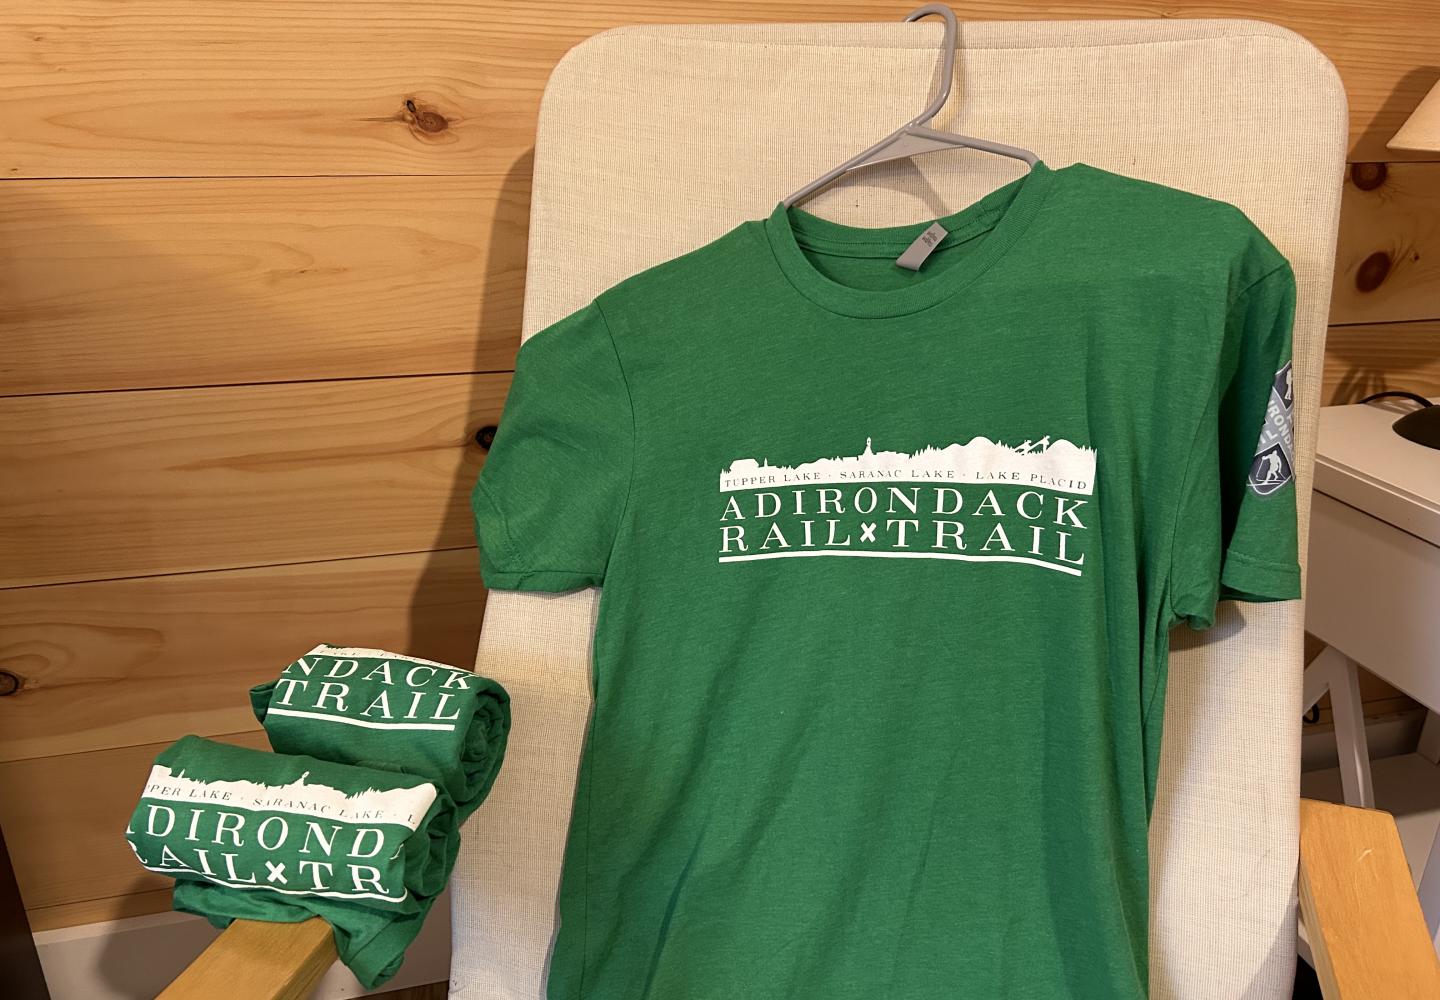 The purchase of Adirondack Rail Trail tee shirts supports youth cycling programs.